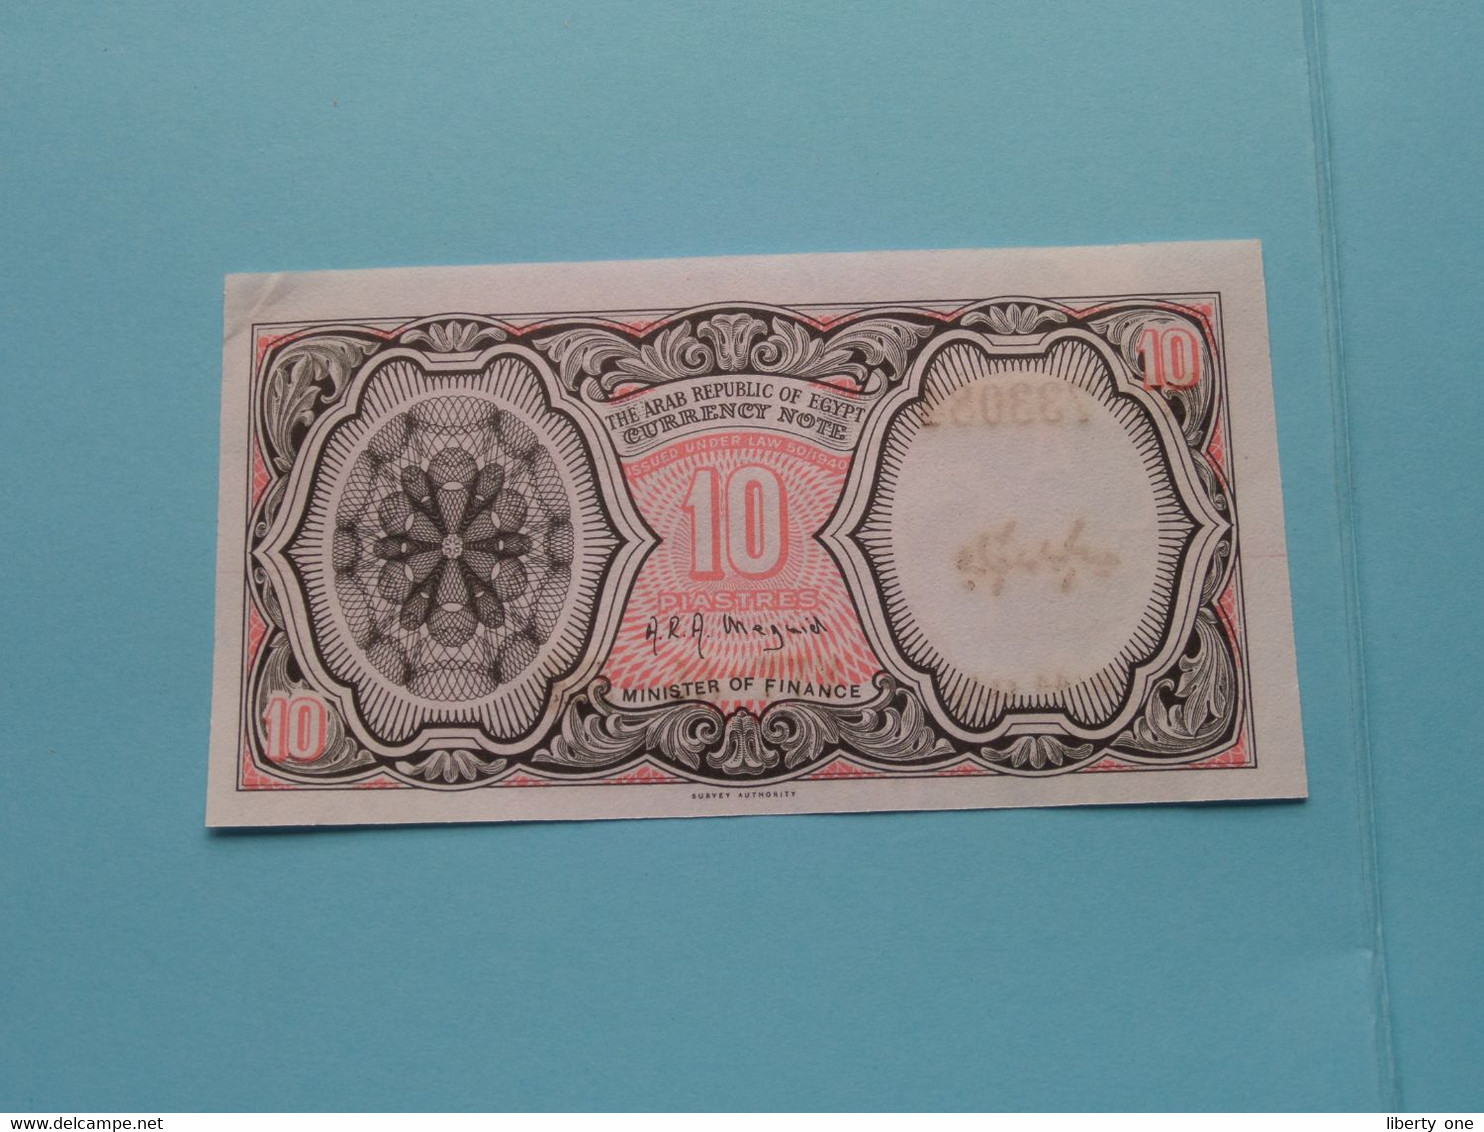 10 Piastres > The Arab Republic Of EGYPT Currency Note N° 733084 - B/44 ( For Grade, Please See Photo ) UNC > Egypt ! - Egitto